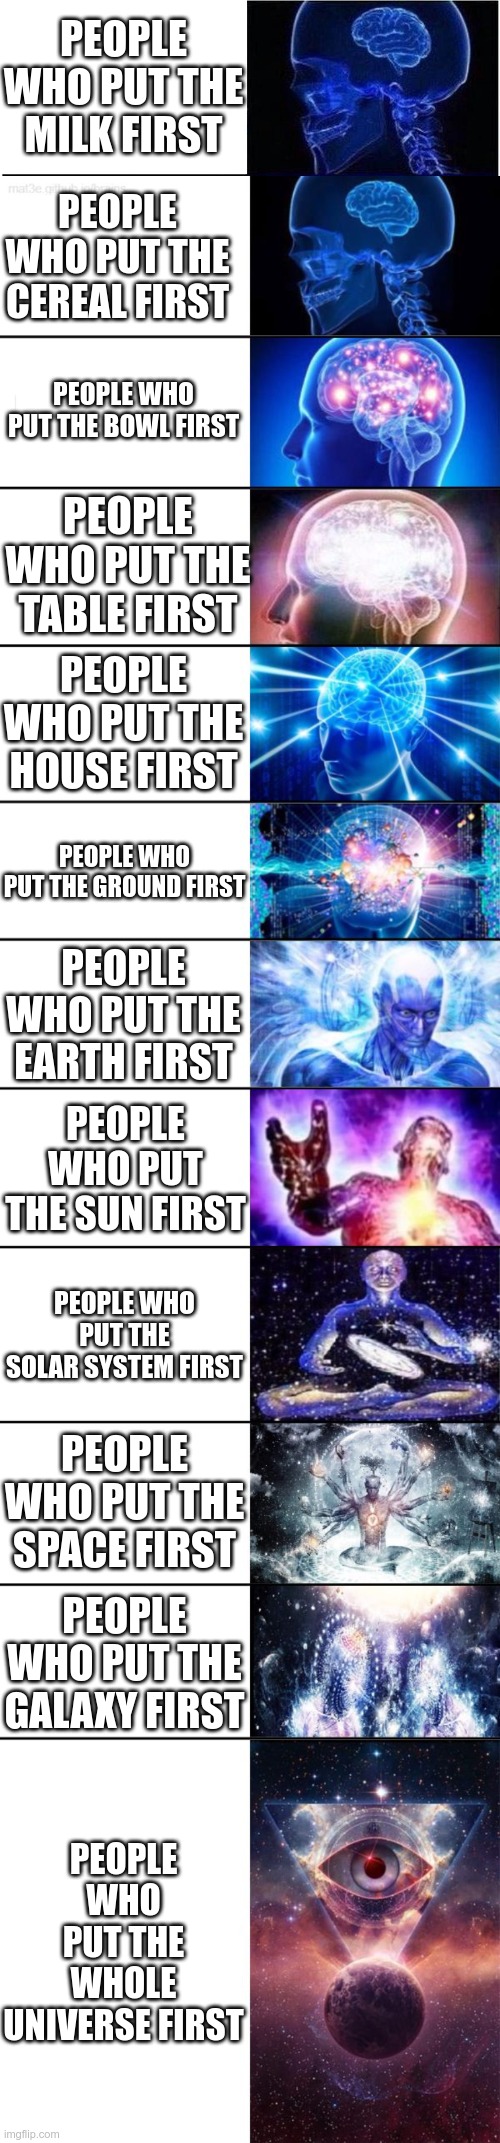 And what do you put first? | PEOPLE WHO PUT THE MILK FIRST; PEOPLE WHO PUT THE CEREAL FIRST; PEOPLE WHO PUT THE BOWL FIRST; PEOPLE WHO PUT THE TABLE FIRST; PEOPLE WHO PUT THE HOUSE FIRST; PEOPLE WHO PUT THE GROUND FIRST; PEOPLE WHO PUT THE EARTH FIRST; PEOPLE WHO PUT THE SUN FIRST; PEOPLE WHO PUT THE SOLAR SYSTEM FIRST; PEOPLE WHO PUT THE SPACE FIRST; PEOPLE WHO PUT THE GALAXY FIRST; PEOPLE WHO PUT THE WHOLE UNIVERSE FIRST | image tagged in memes,expanding brain,extended expanding brain | made w/ Imgflip meme maker